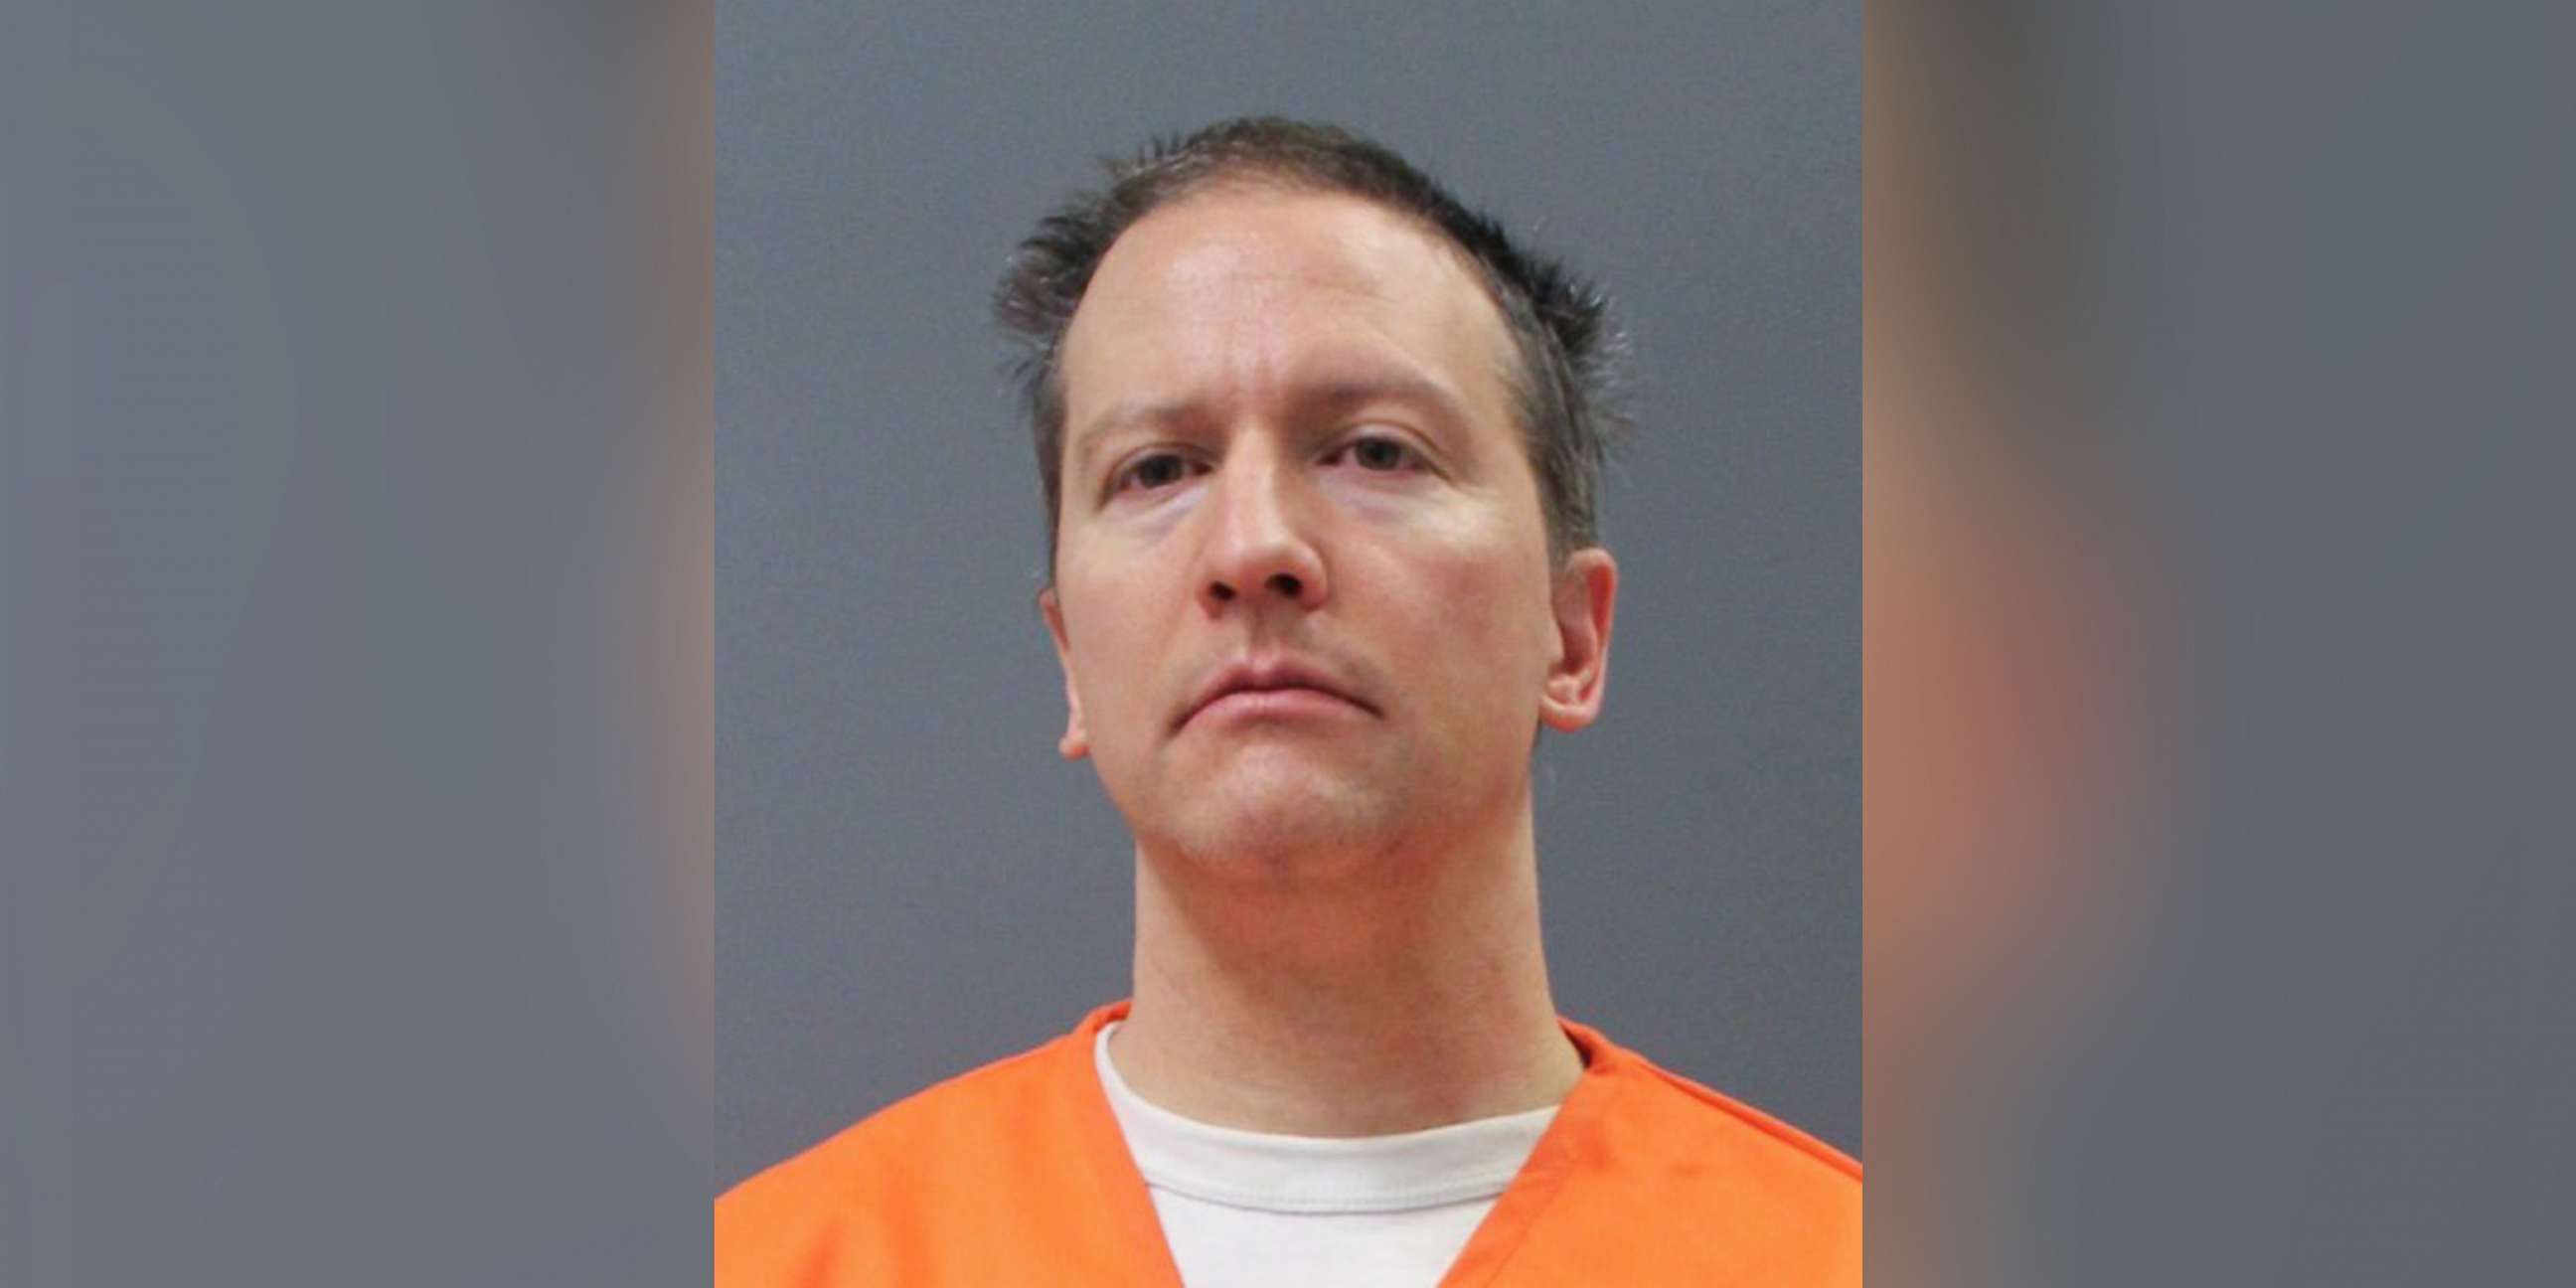 PHOTO: Former Minneapolis police officer Derek Chauvin is pictured in an intake mugshot released by the Minnesota Department of Corrections on April 21, 2021.